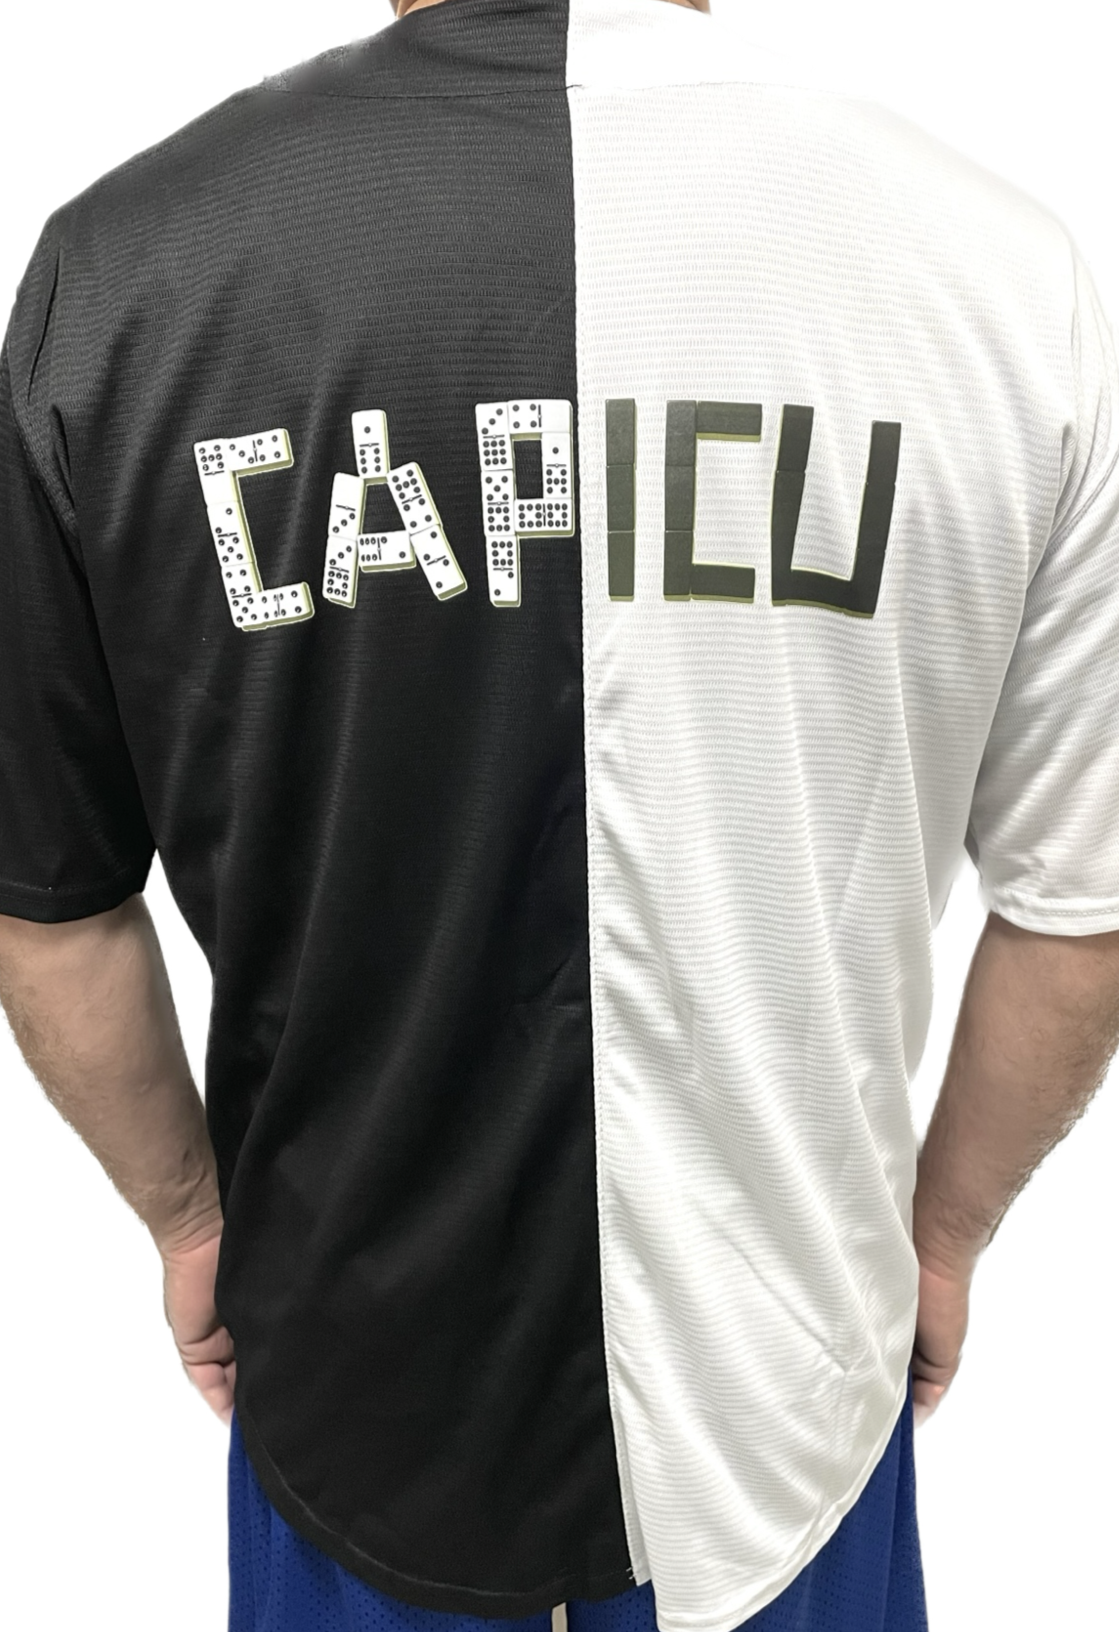 Baseball Jersey With Dominos Expression "Capicu" on Back